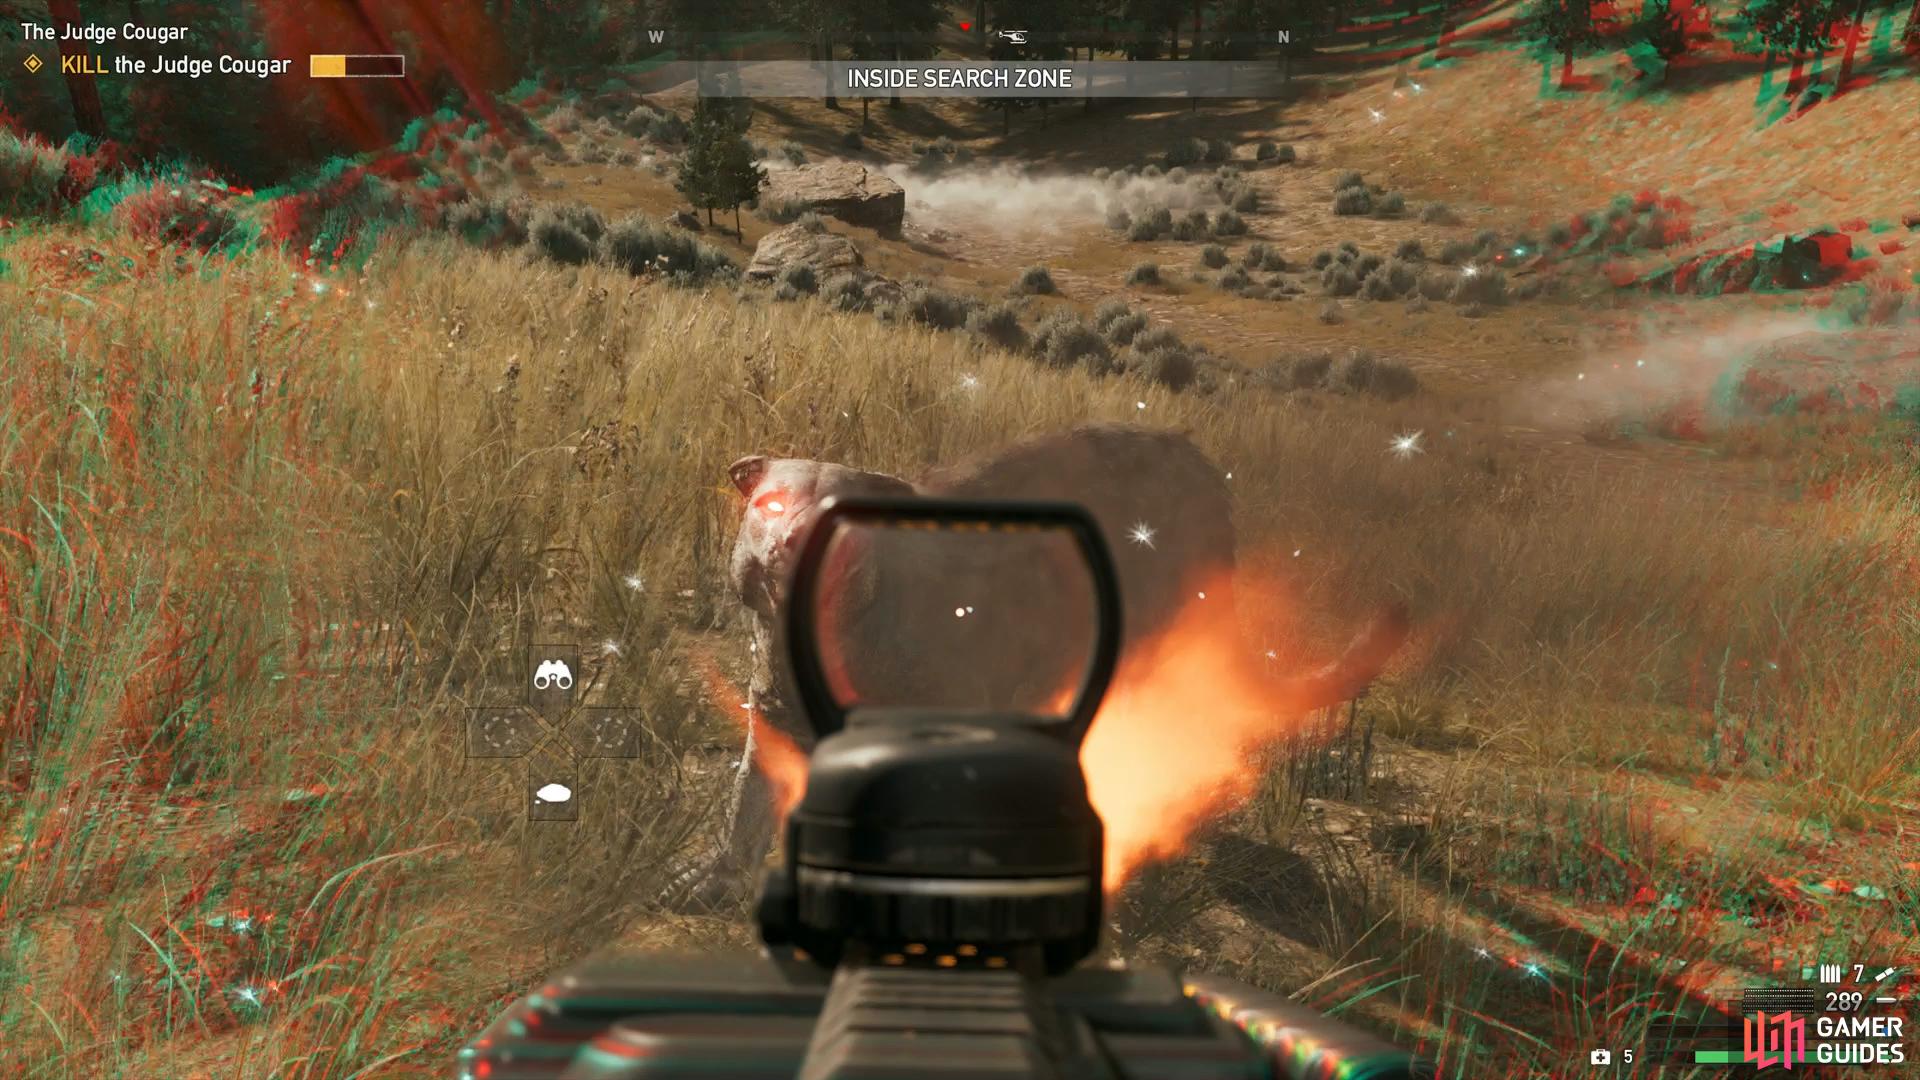 An LMG works incredibly well against the speed of the Judge Cougar.